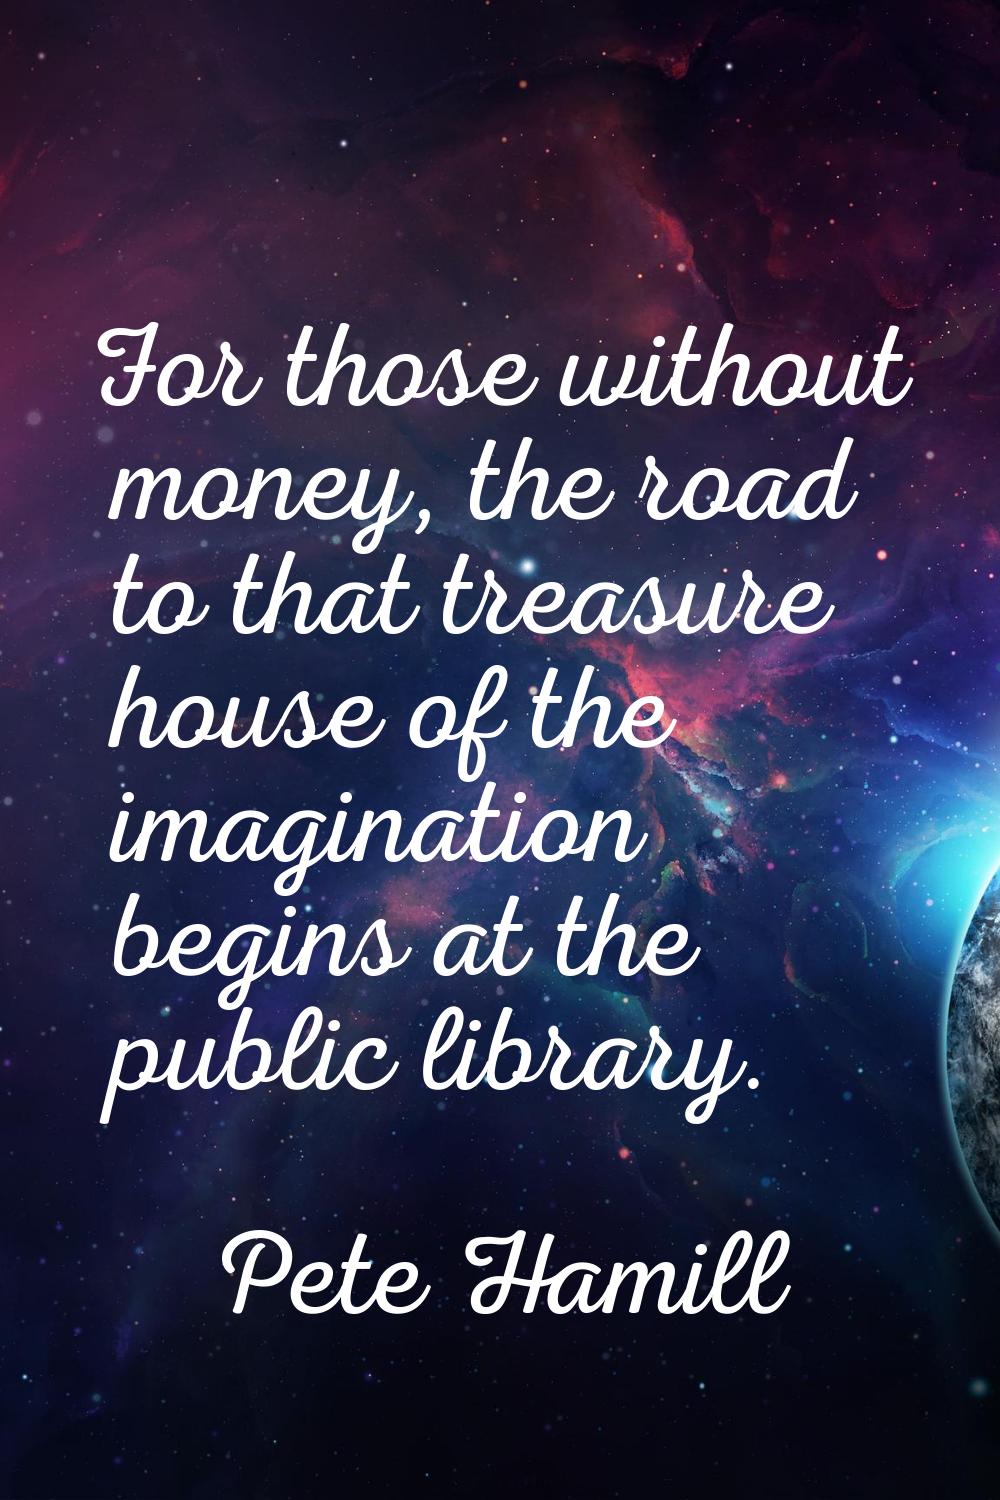 For those without money, the road to that treasure house of the imagination begins at the public li